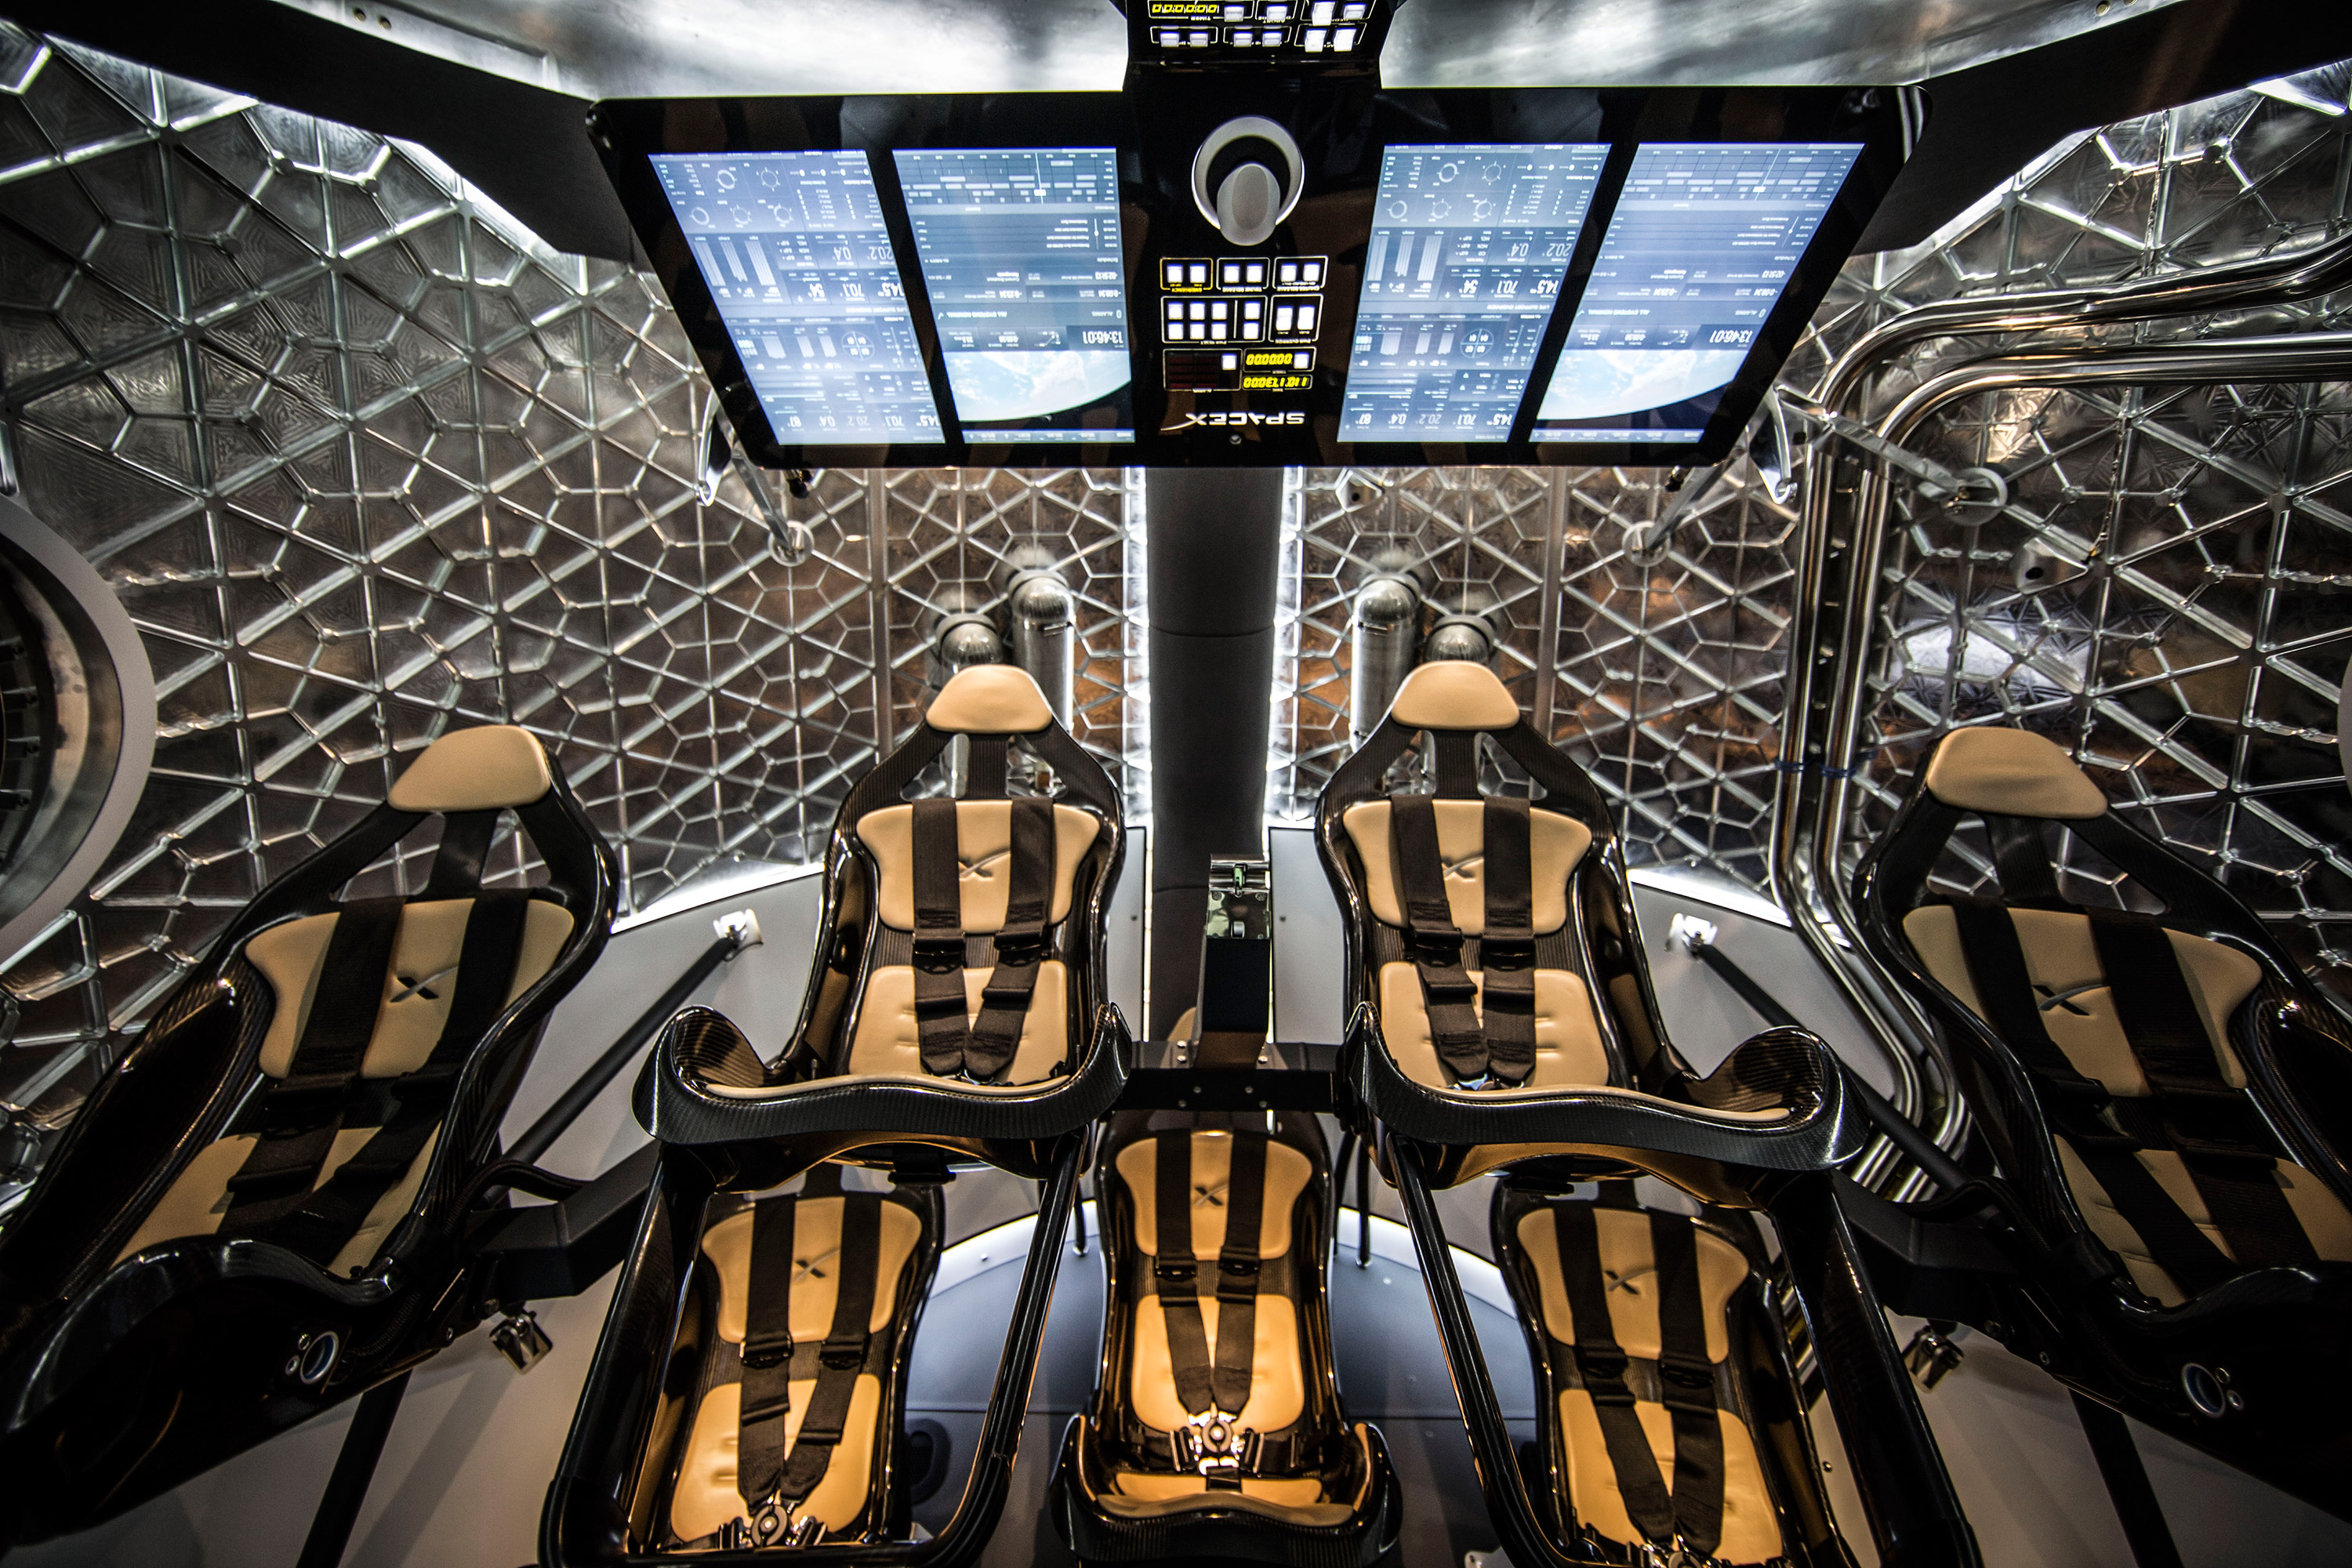 Featuring seating for seven astronauts, the Dragon V2 will be capable of delivering new crews to the International Space Station and eventually Mars. Credit: SpaceX